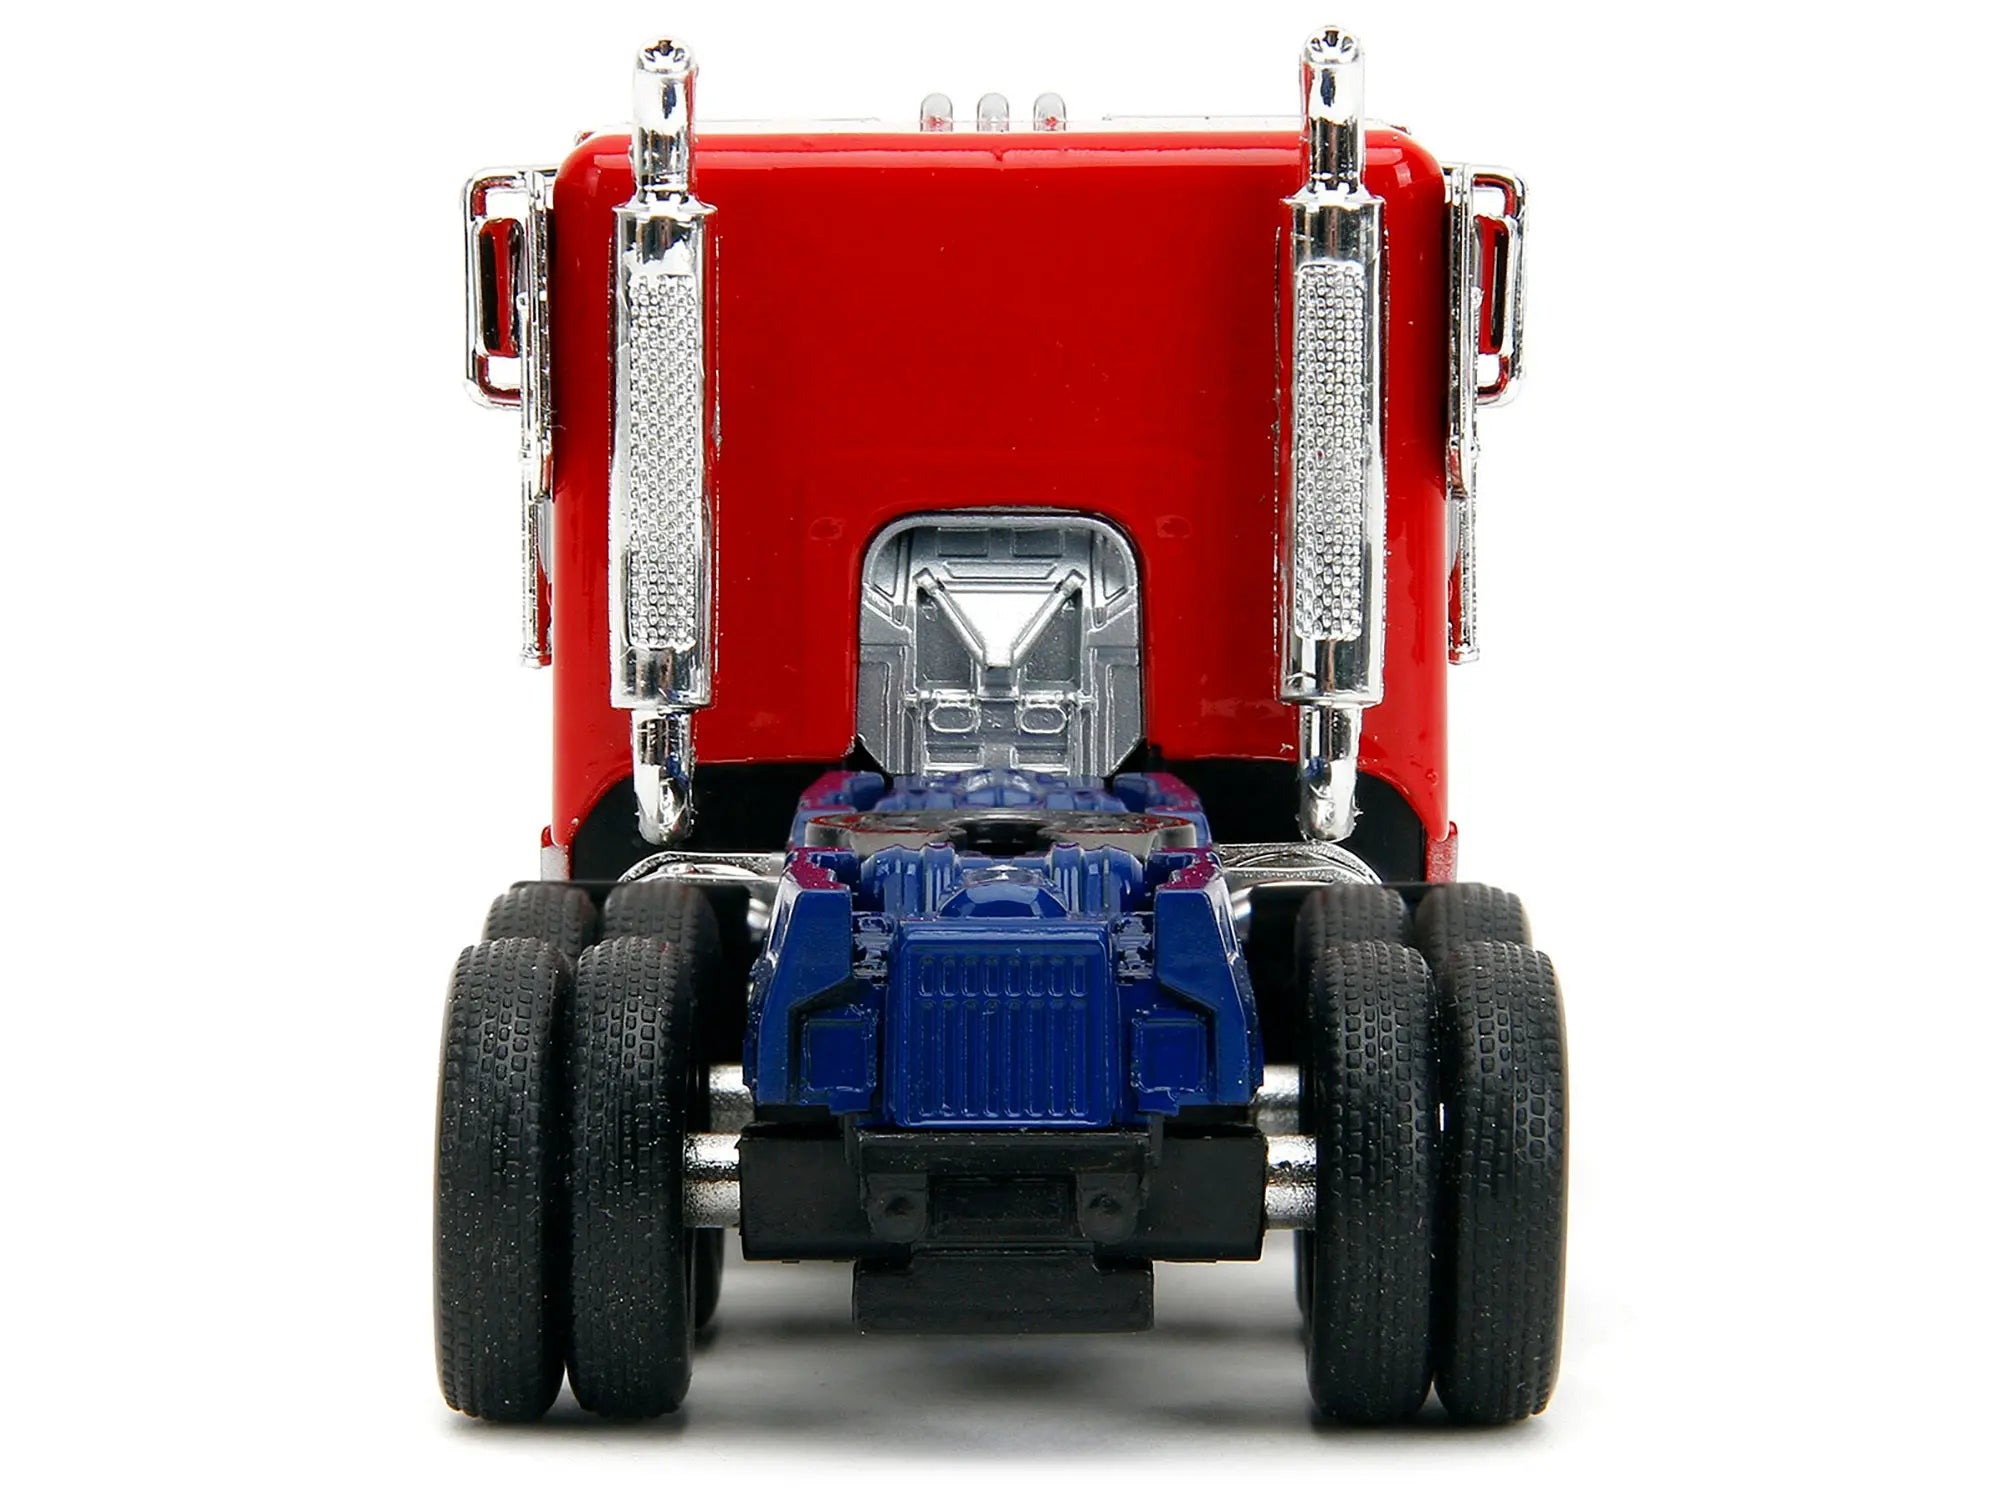 Optimus Prime Tractor Truck Red and Blue with Silver Stripes "Transformers: Rise of the Beasts" (2023) Movie "Hollywood Rides" Series 1/32 Diecast Model Car by Jada Jada